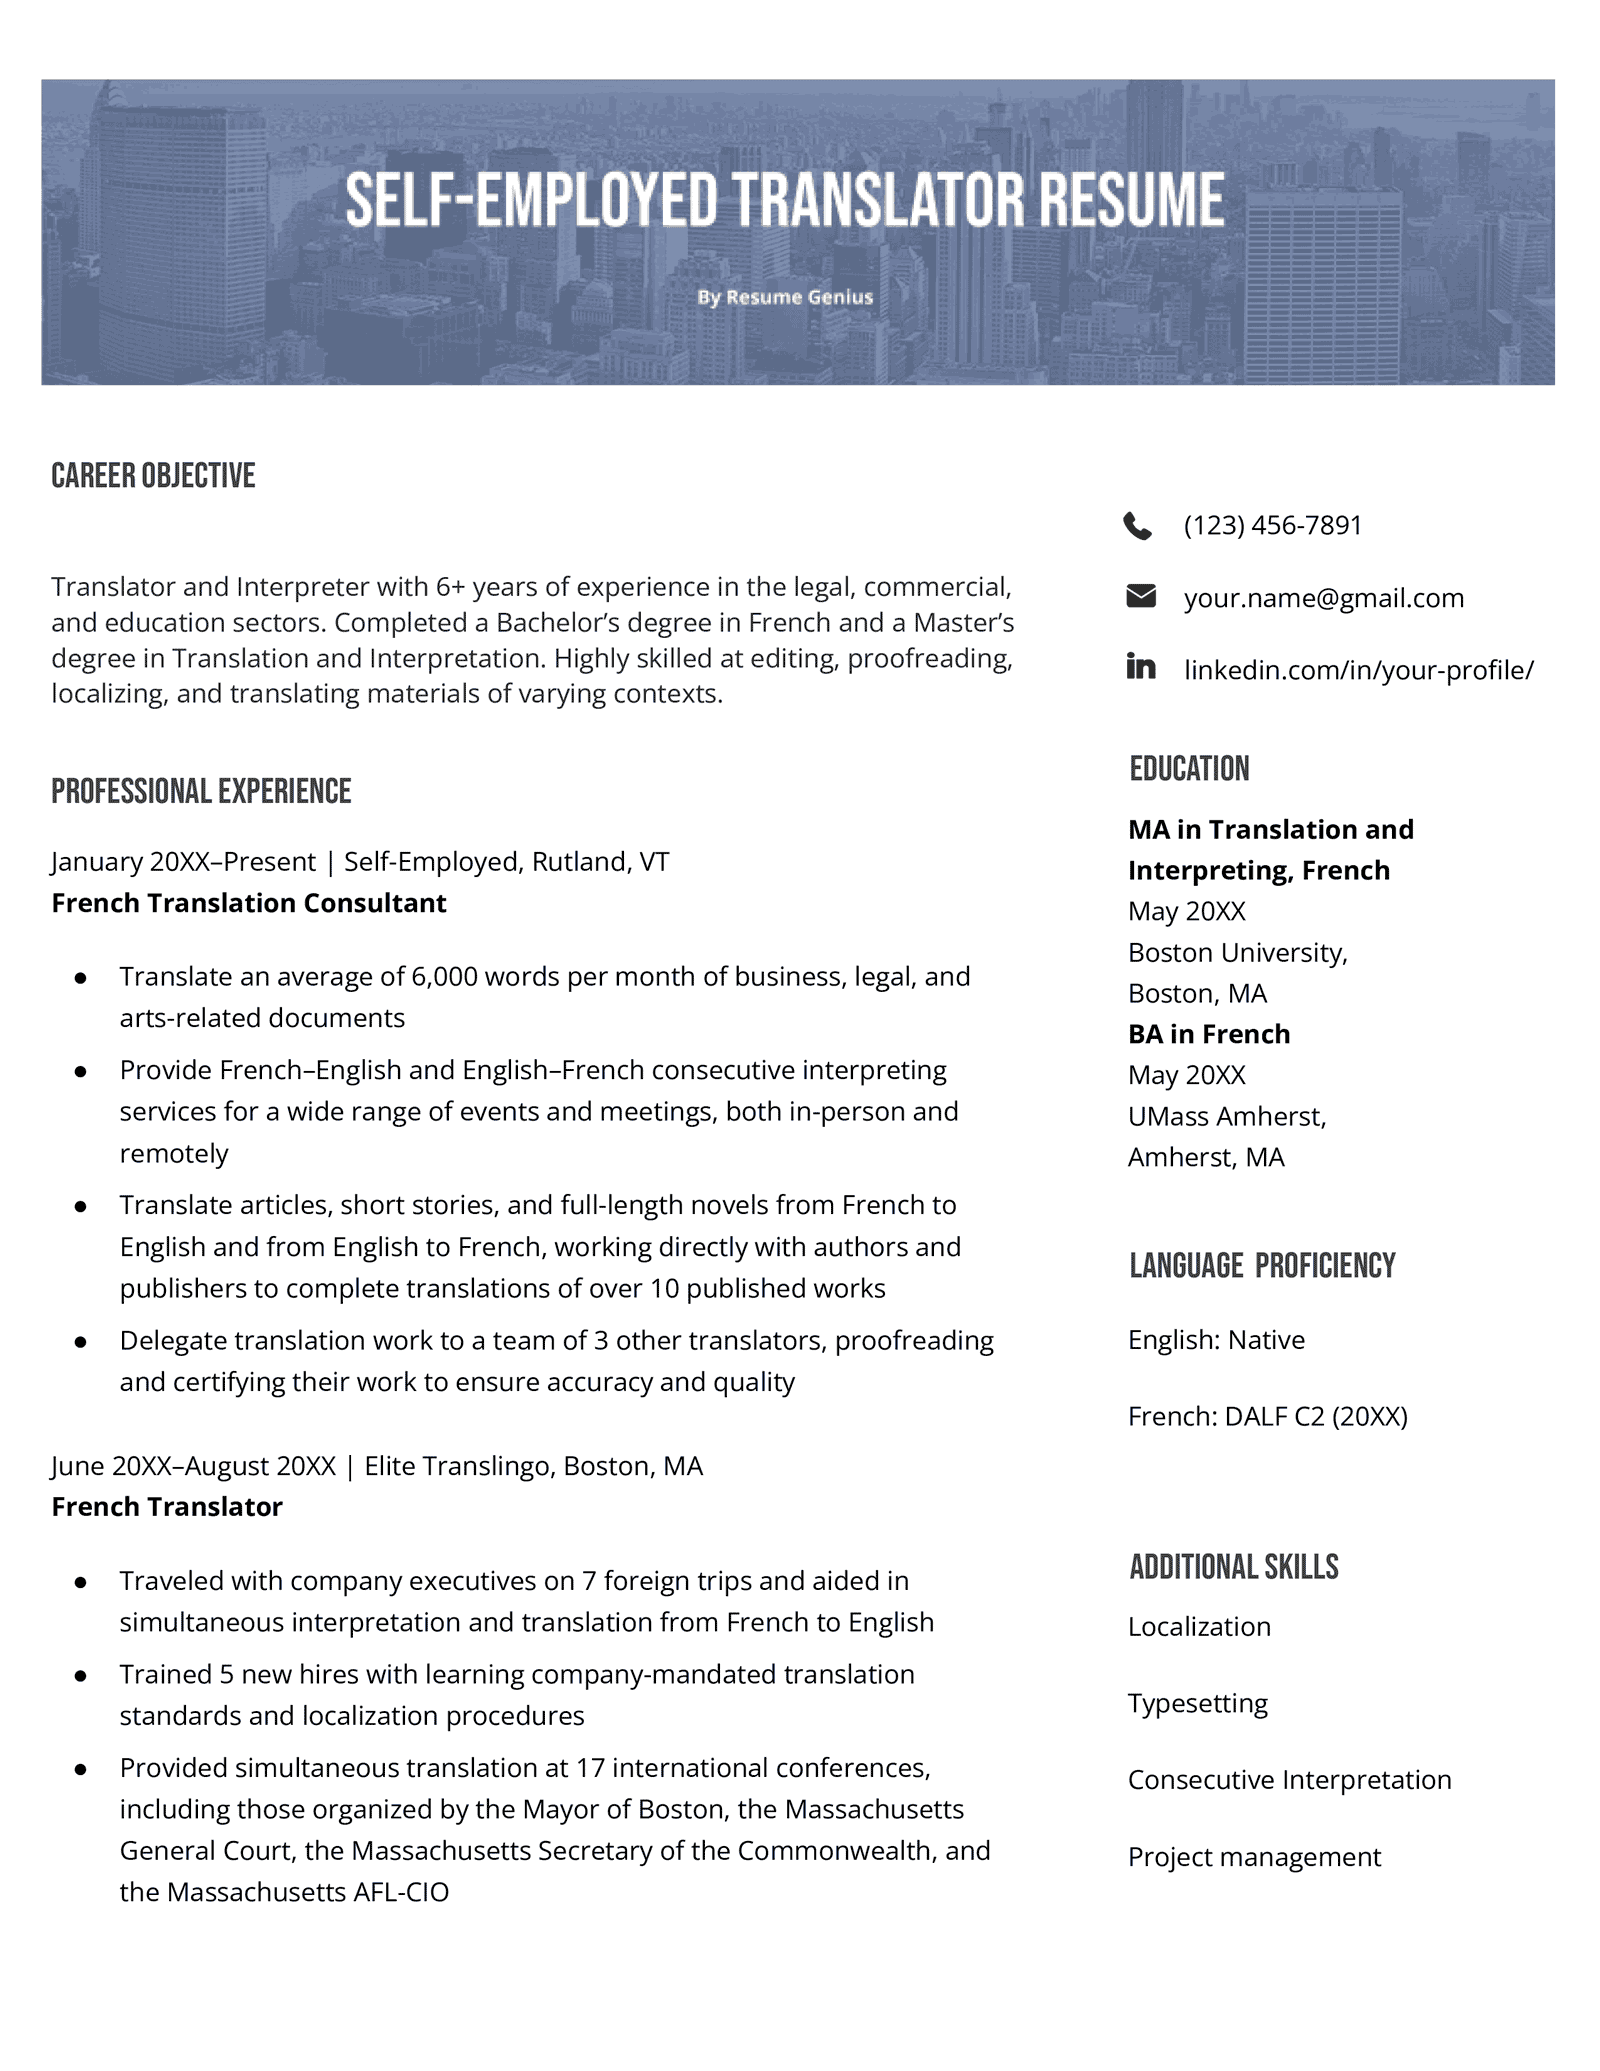 A self-employed resume sample that effectively showcases the full-time self-employment in the work experience section by using an appropriate company name and job title, and listing specific projects and accomplishments in a bullet point list